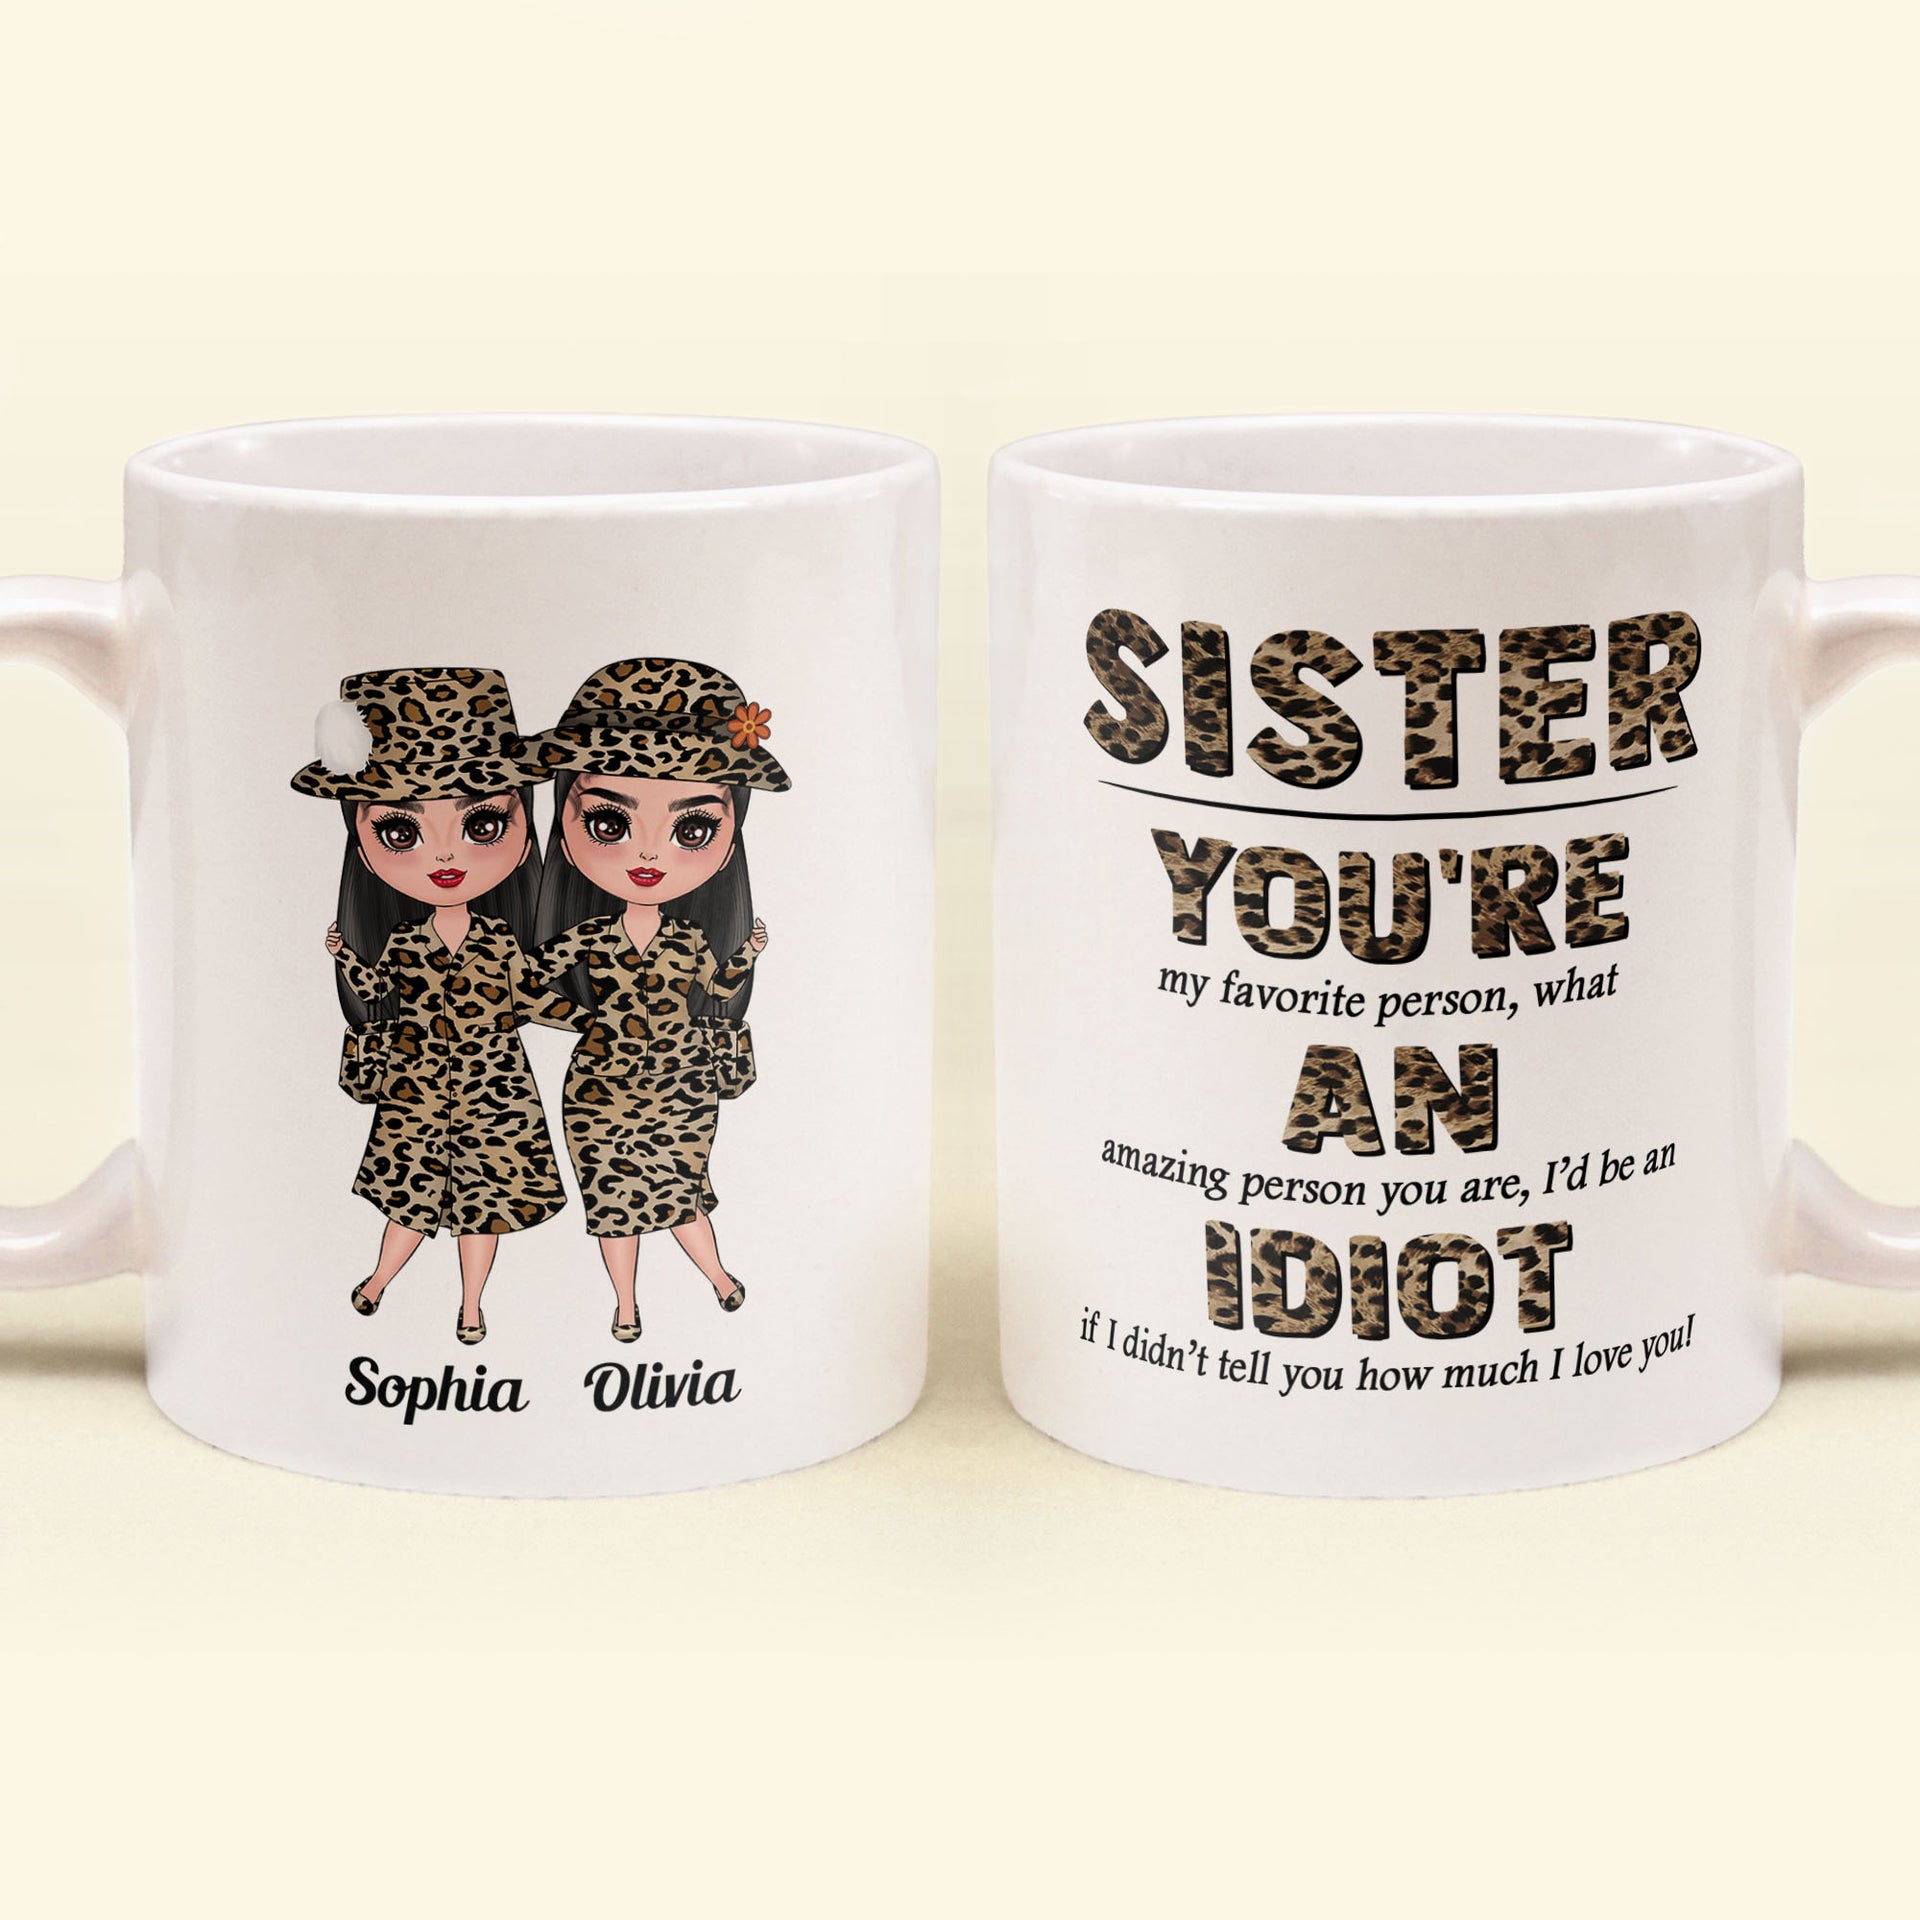 You're an Idiot Gift Mug for Brother From Sister 